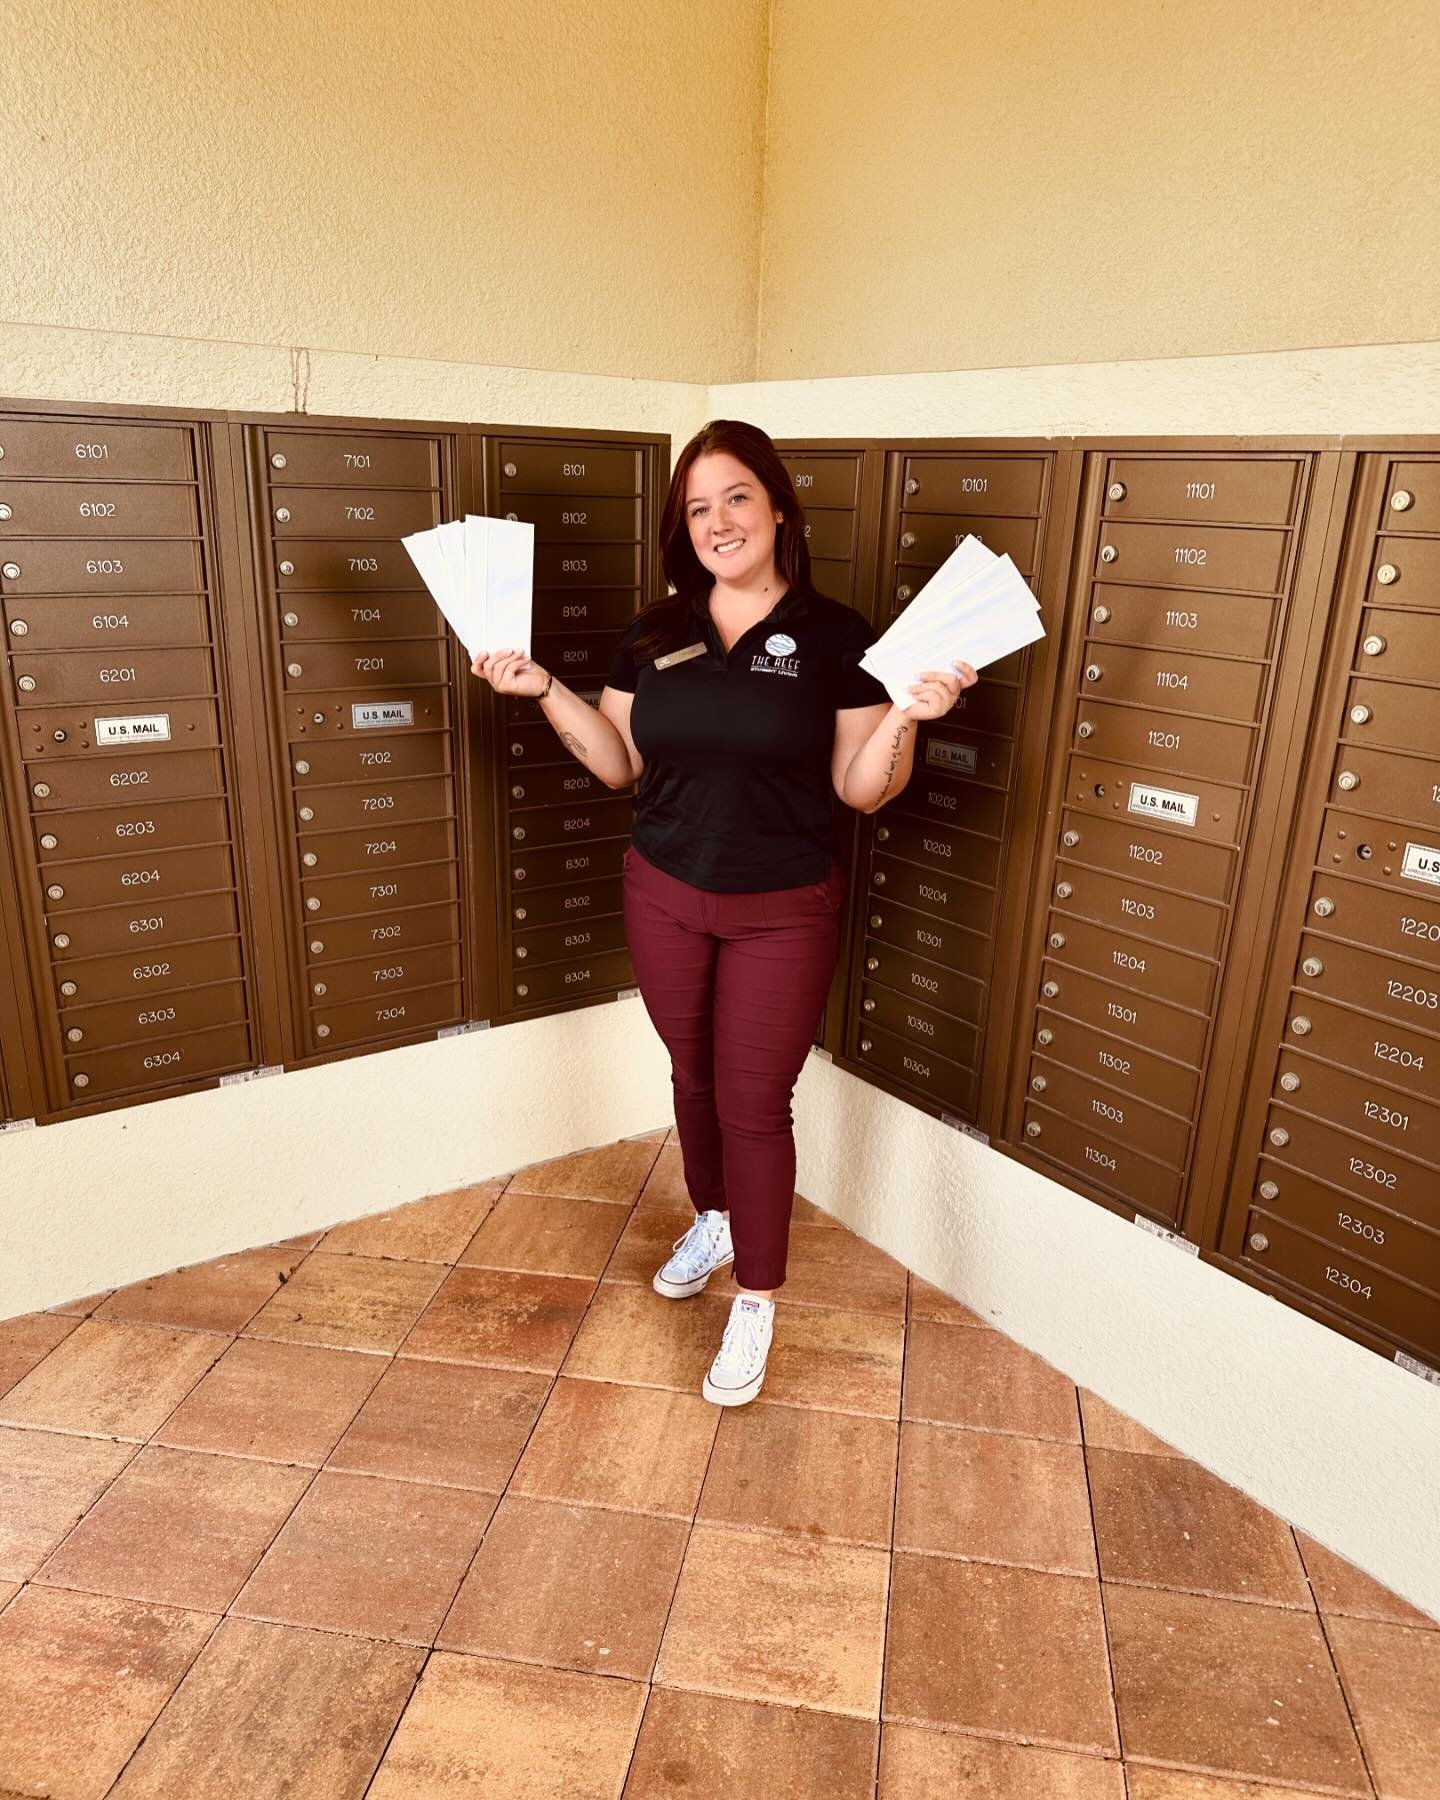 📬 Friendly reminder: Don&rsquo;t forget to check your mailboxes regularly! Your next surprise might be waiting for you there. 💌
&bull;
&bull;
&bull;
#CheckYourMailbox #mail #mailbox #usps #papermailonly #packagesgotooffice #rememberyourkey #thereef